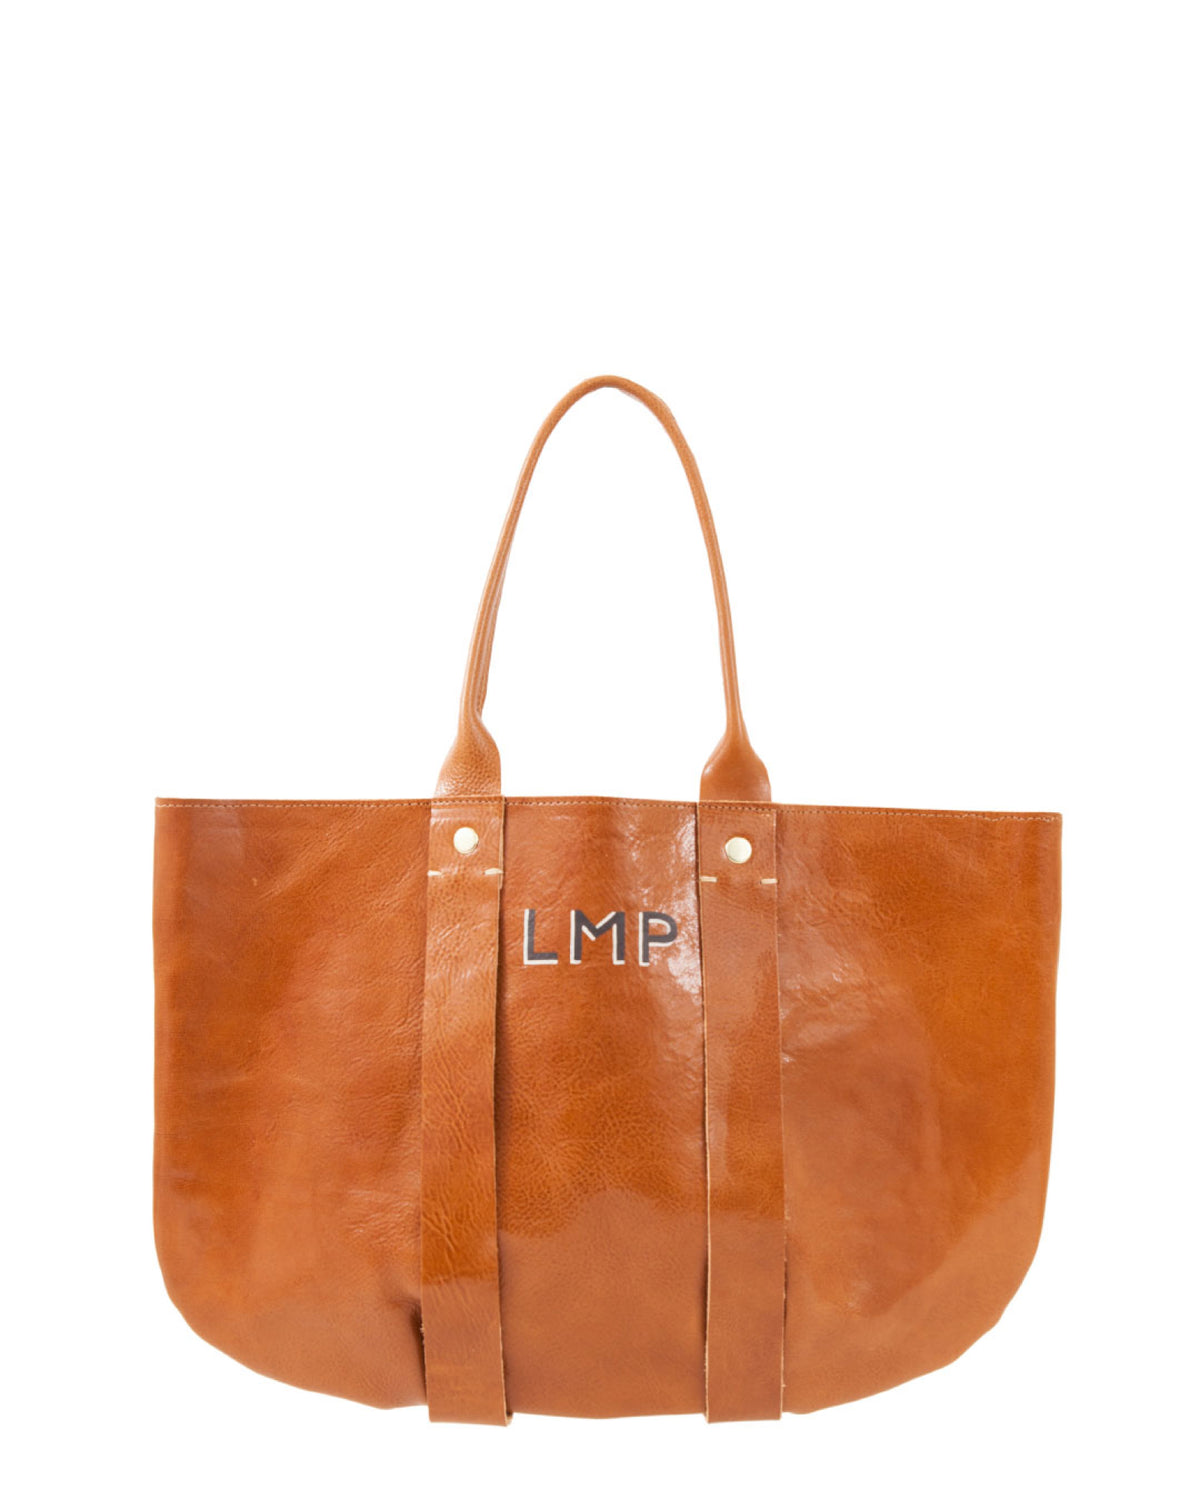 Miel La Tropezienne with 1 Inch Hand Painted Letters On The Top Center Of The Bag